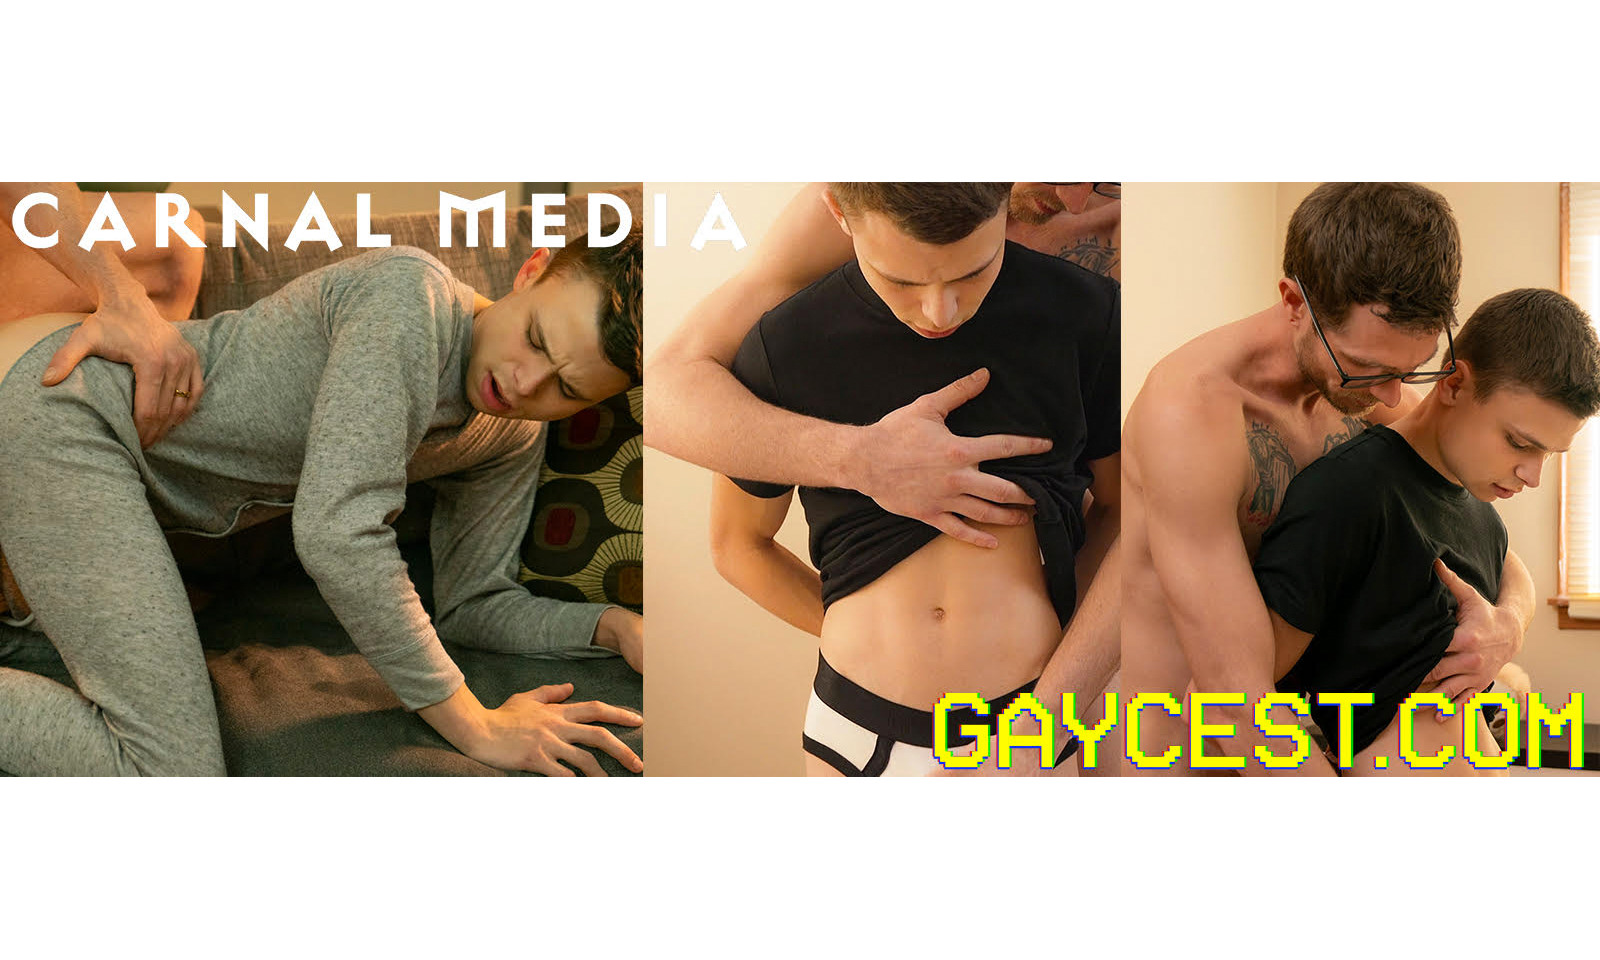 Carnal Media Launches GayCest.com, a Dad/Son Site